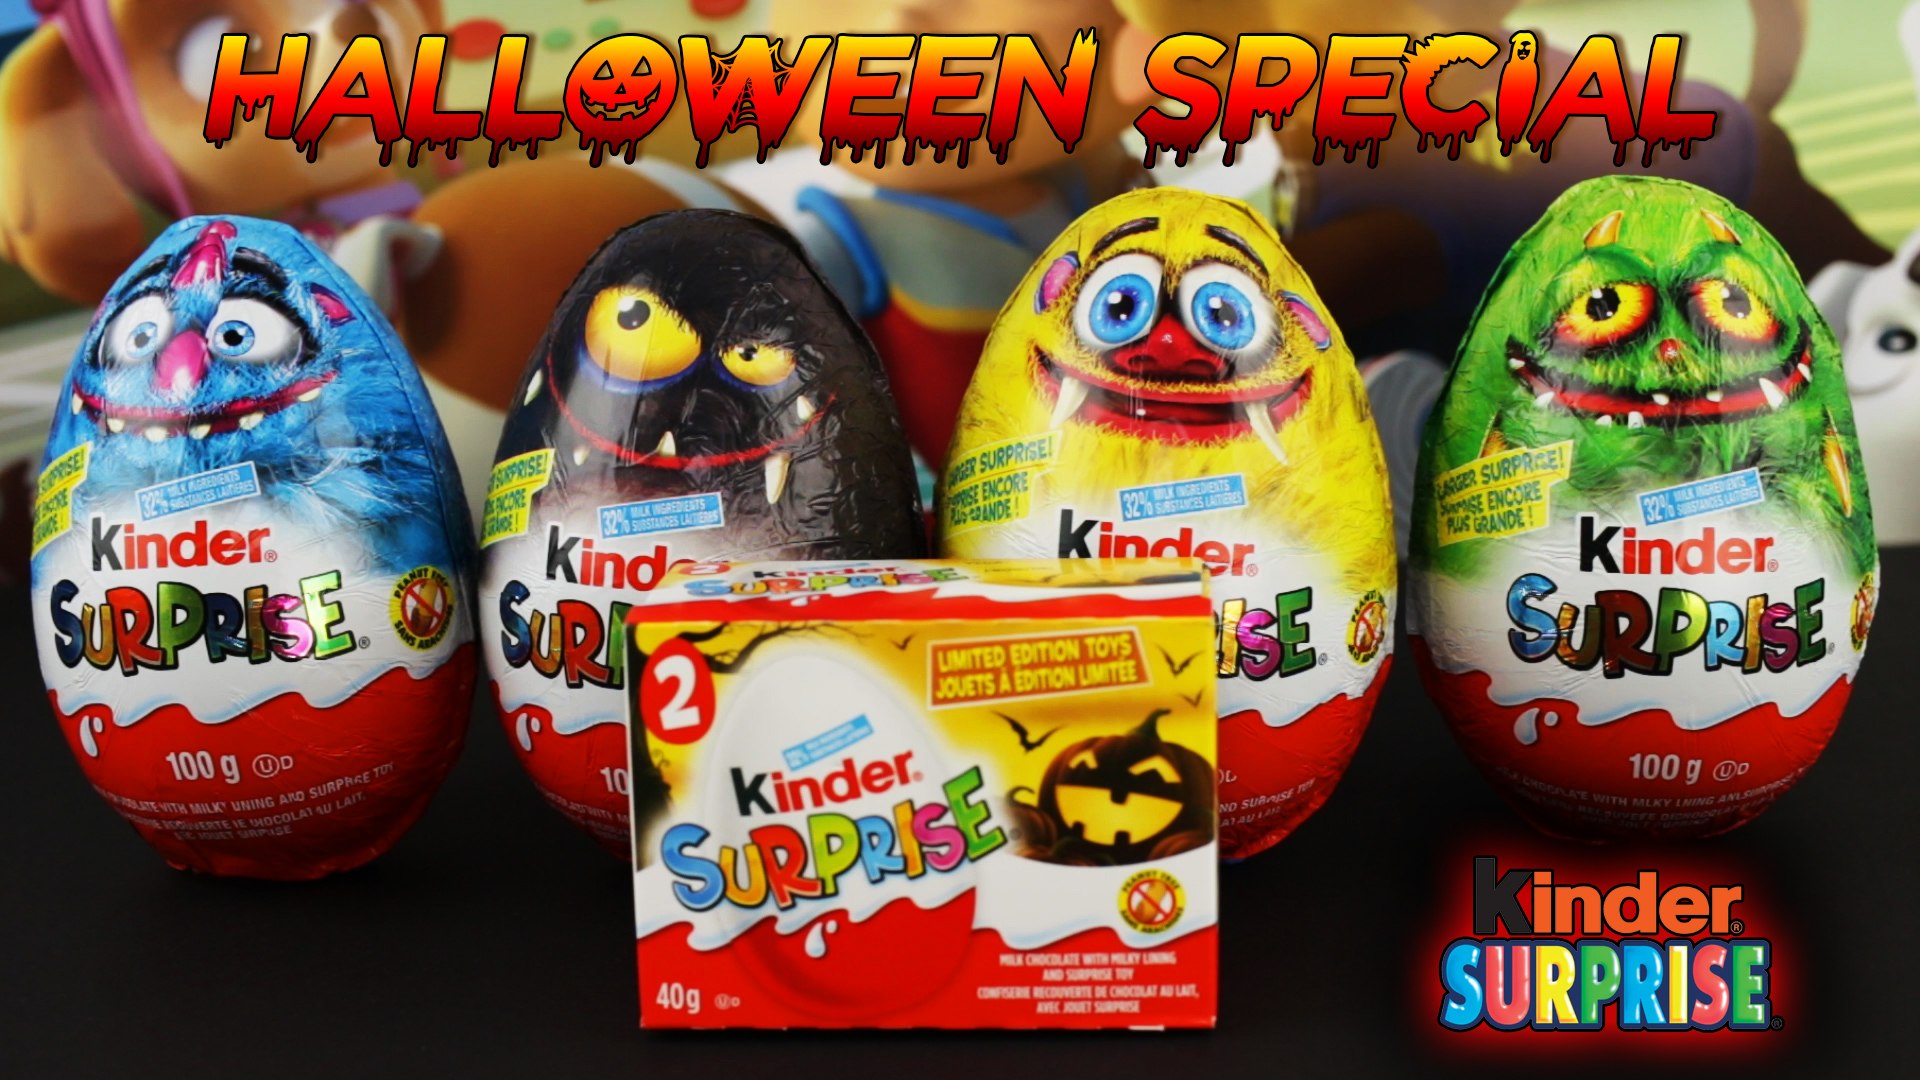 2017 Halloween Special huge kinder maxi opening giant monsters kinder  surprise eggs w scary effects - video Dailymotion